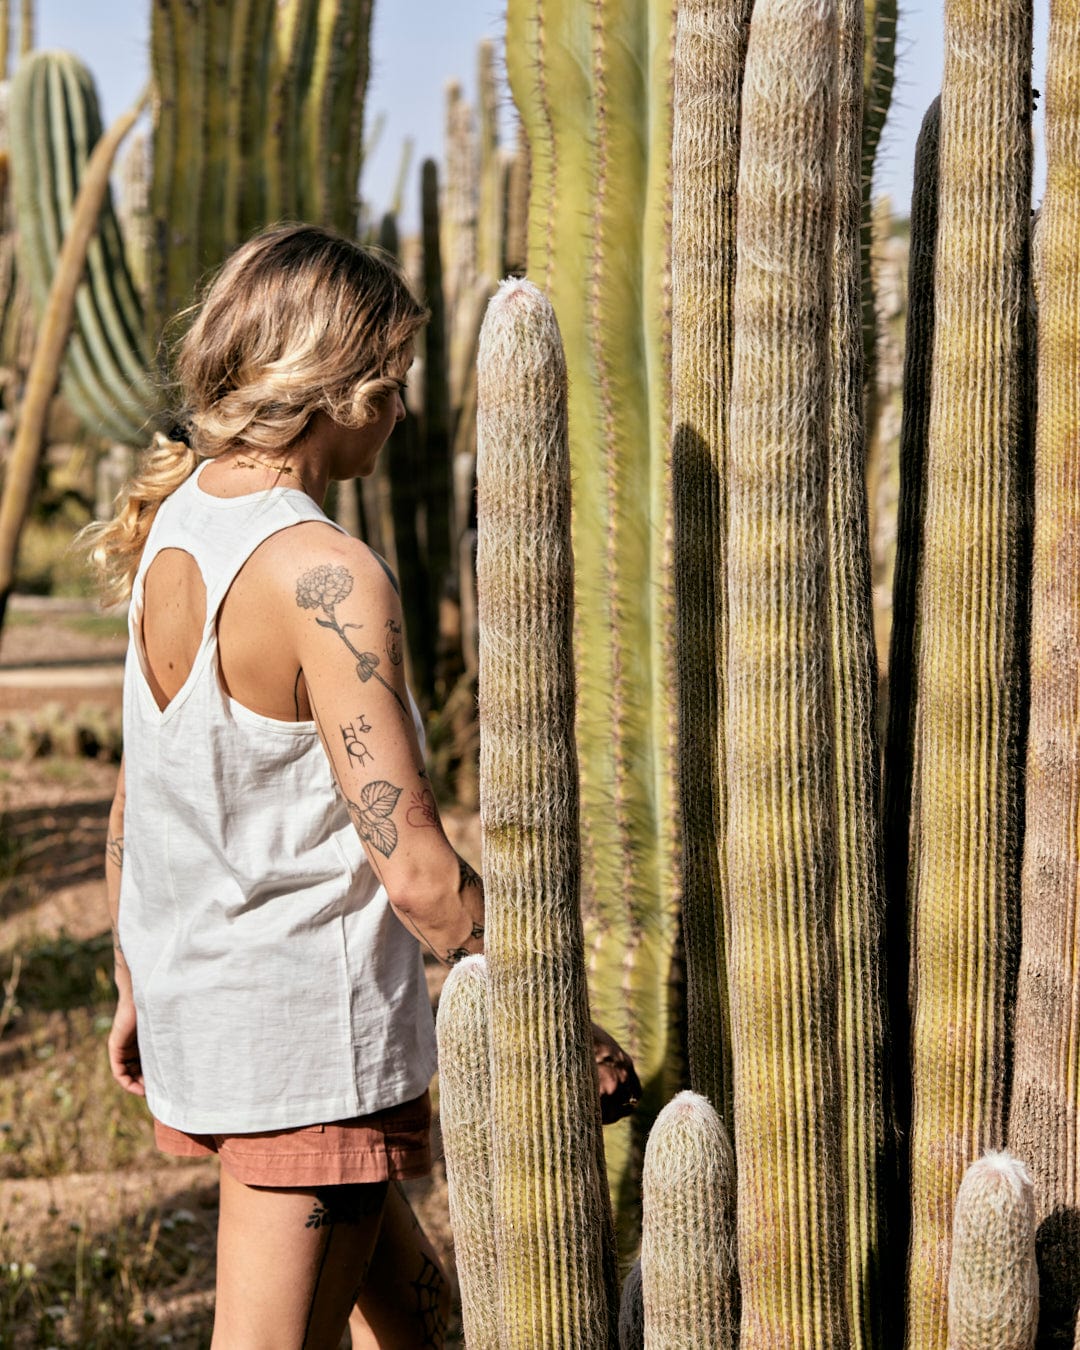 A woman with a tattoo on her arm examines tall cacti in a sunny desert landscape. She wears a Saltrock Palmera Womens Vest in White with a crew neckline and pink shorts.